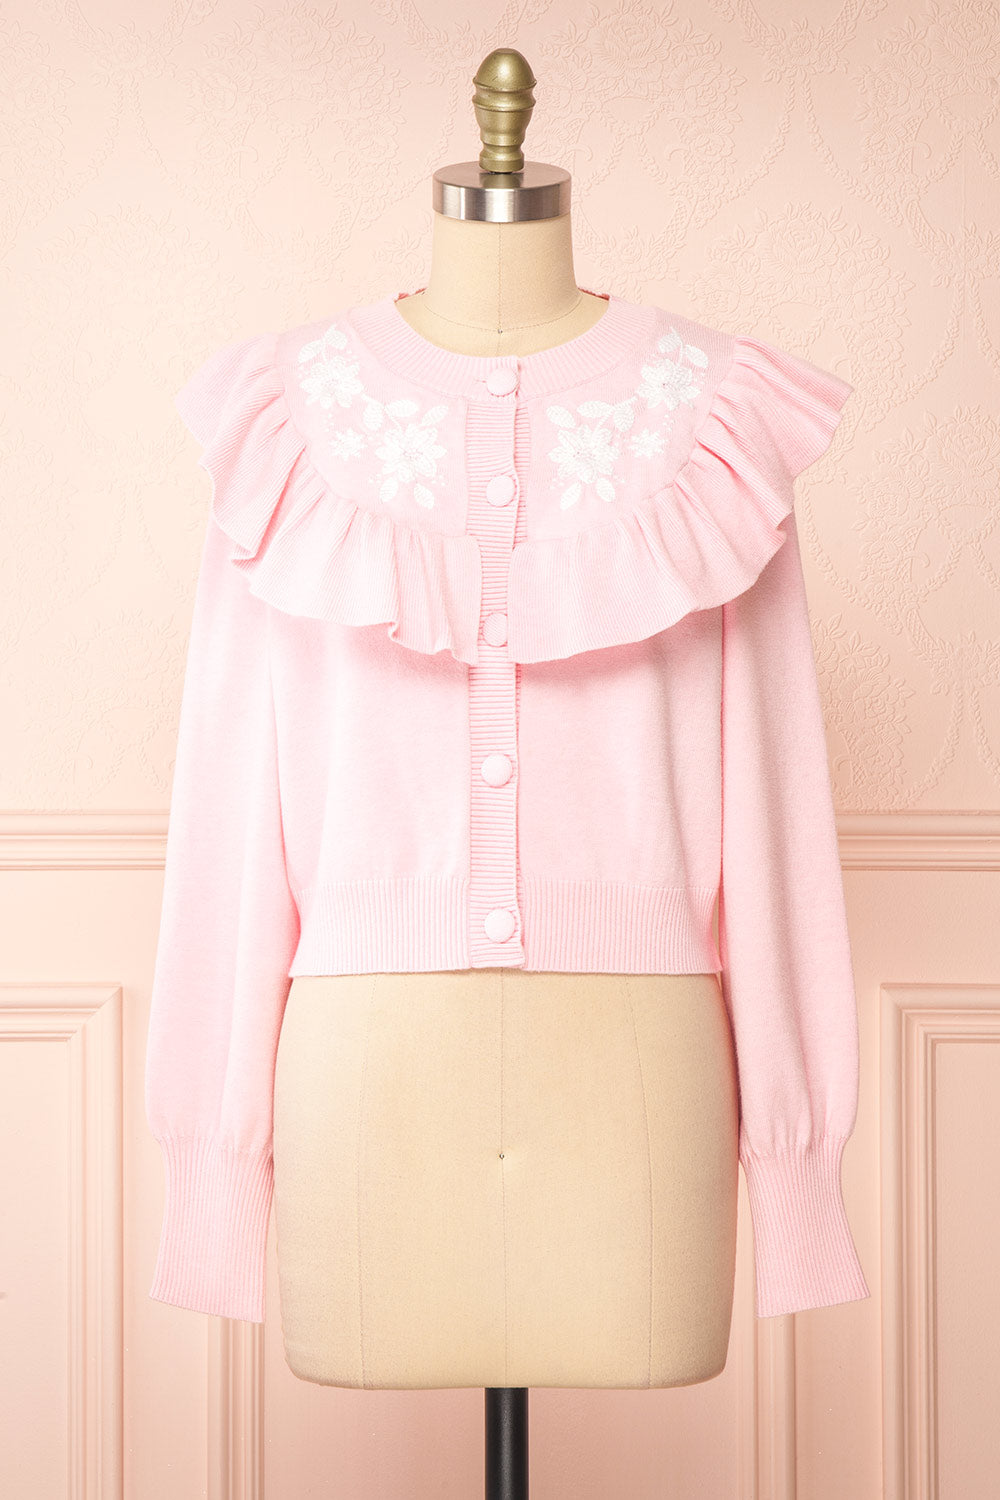 Youjeen Pink Knit Cardigan w/ Ruffles | Boutique 1861 front view 